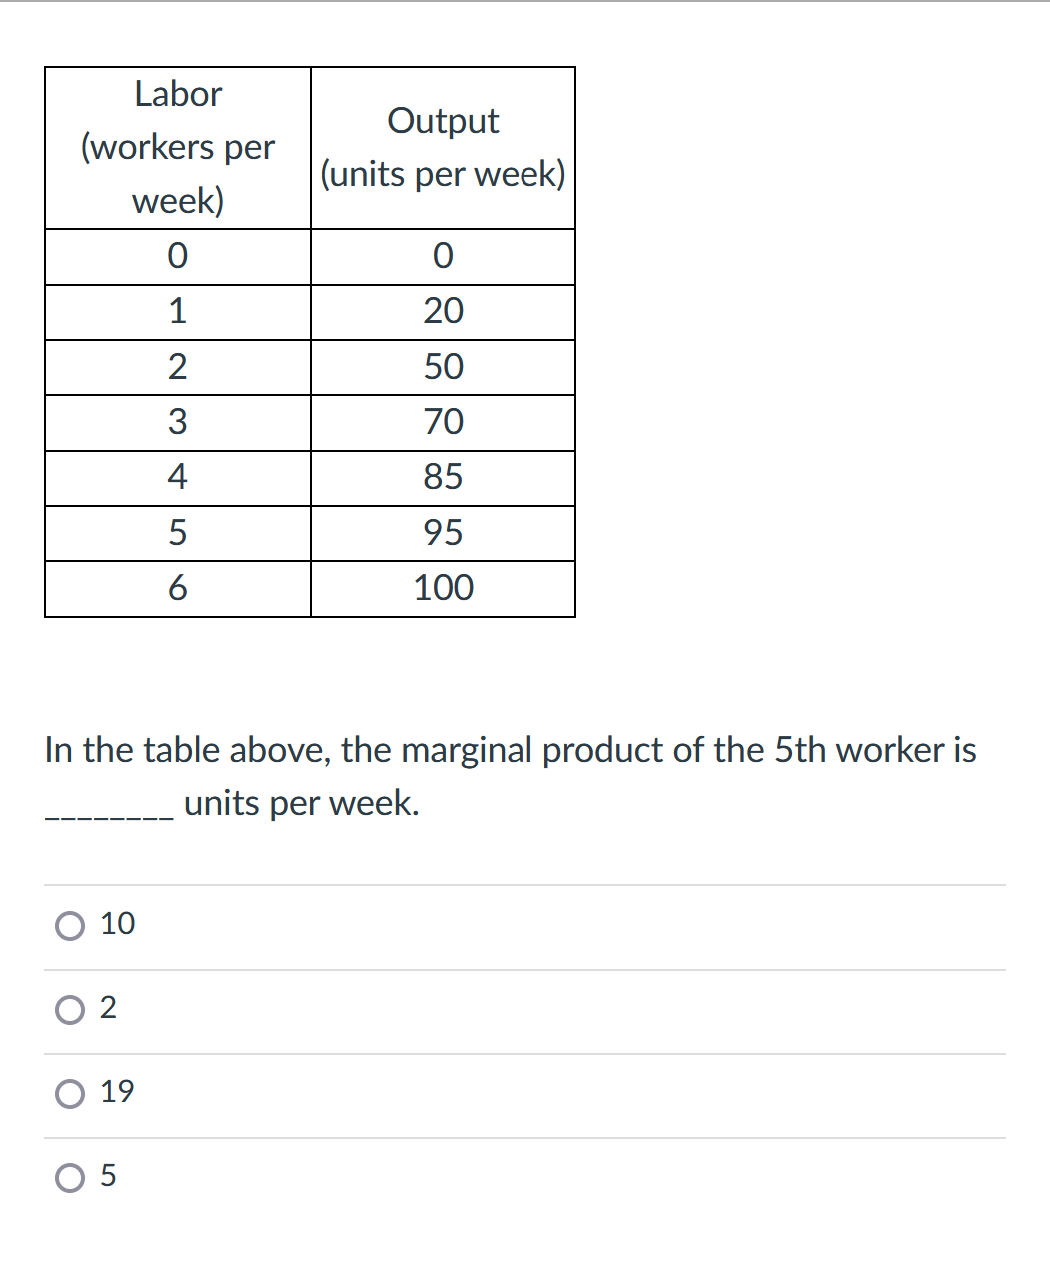 Labor
(workers per
week)
0
1
2
3
4
5
6
10
In the table above, the marginal product of the 5th worker is
units per week.
2
19
Output
(units per week)
05
O
20
50
70
85
95
100